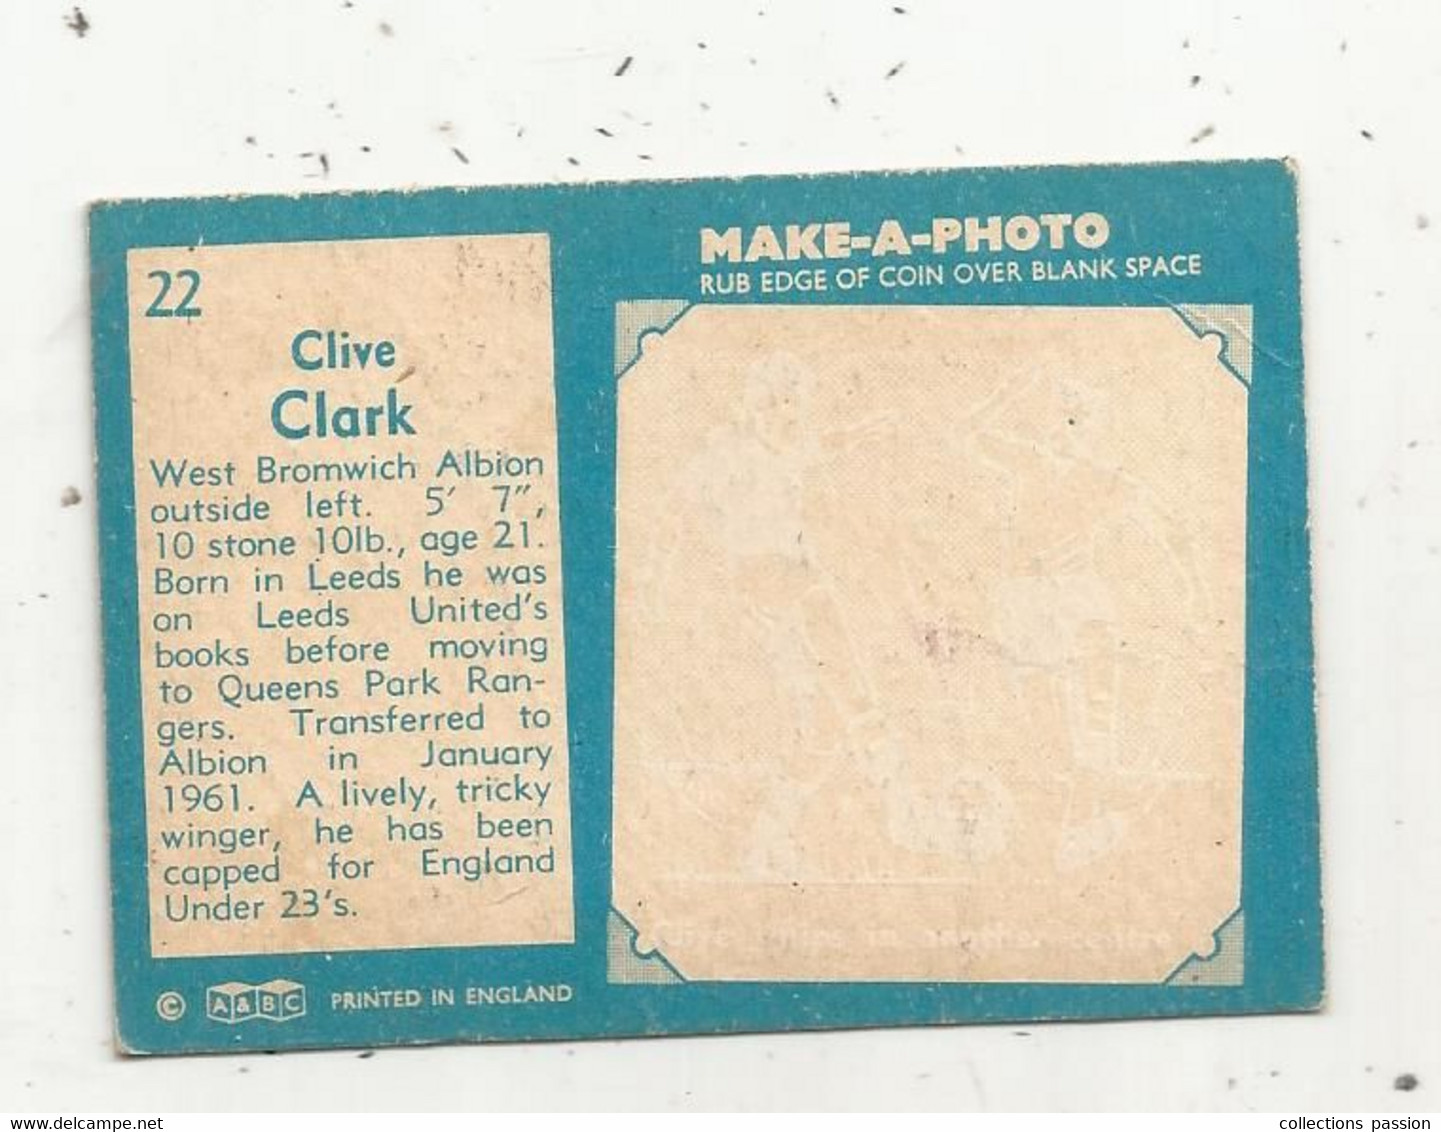 Trading Card , A&BC , England, Chewing Gum, Serie: Make A Photo , Année 60 , N° 22, CLIVE CLARK , West Bromwich Albion - Tarjetas